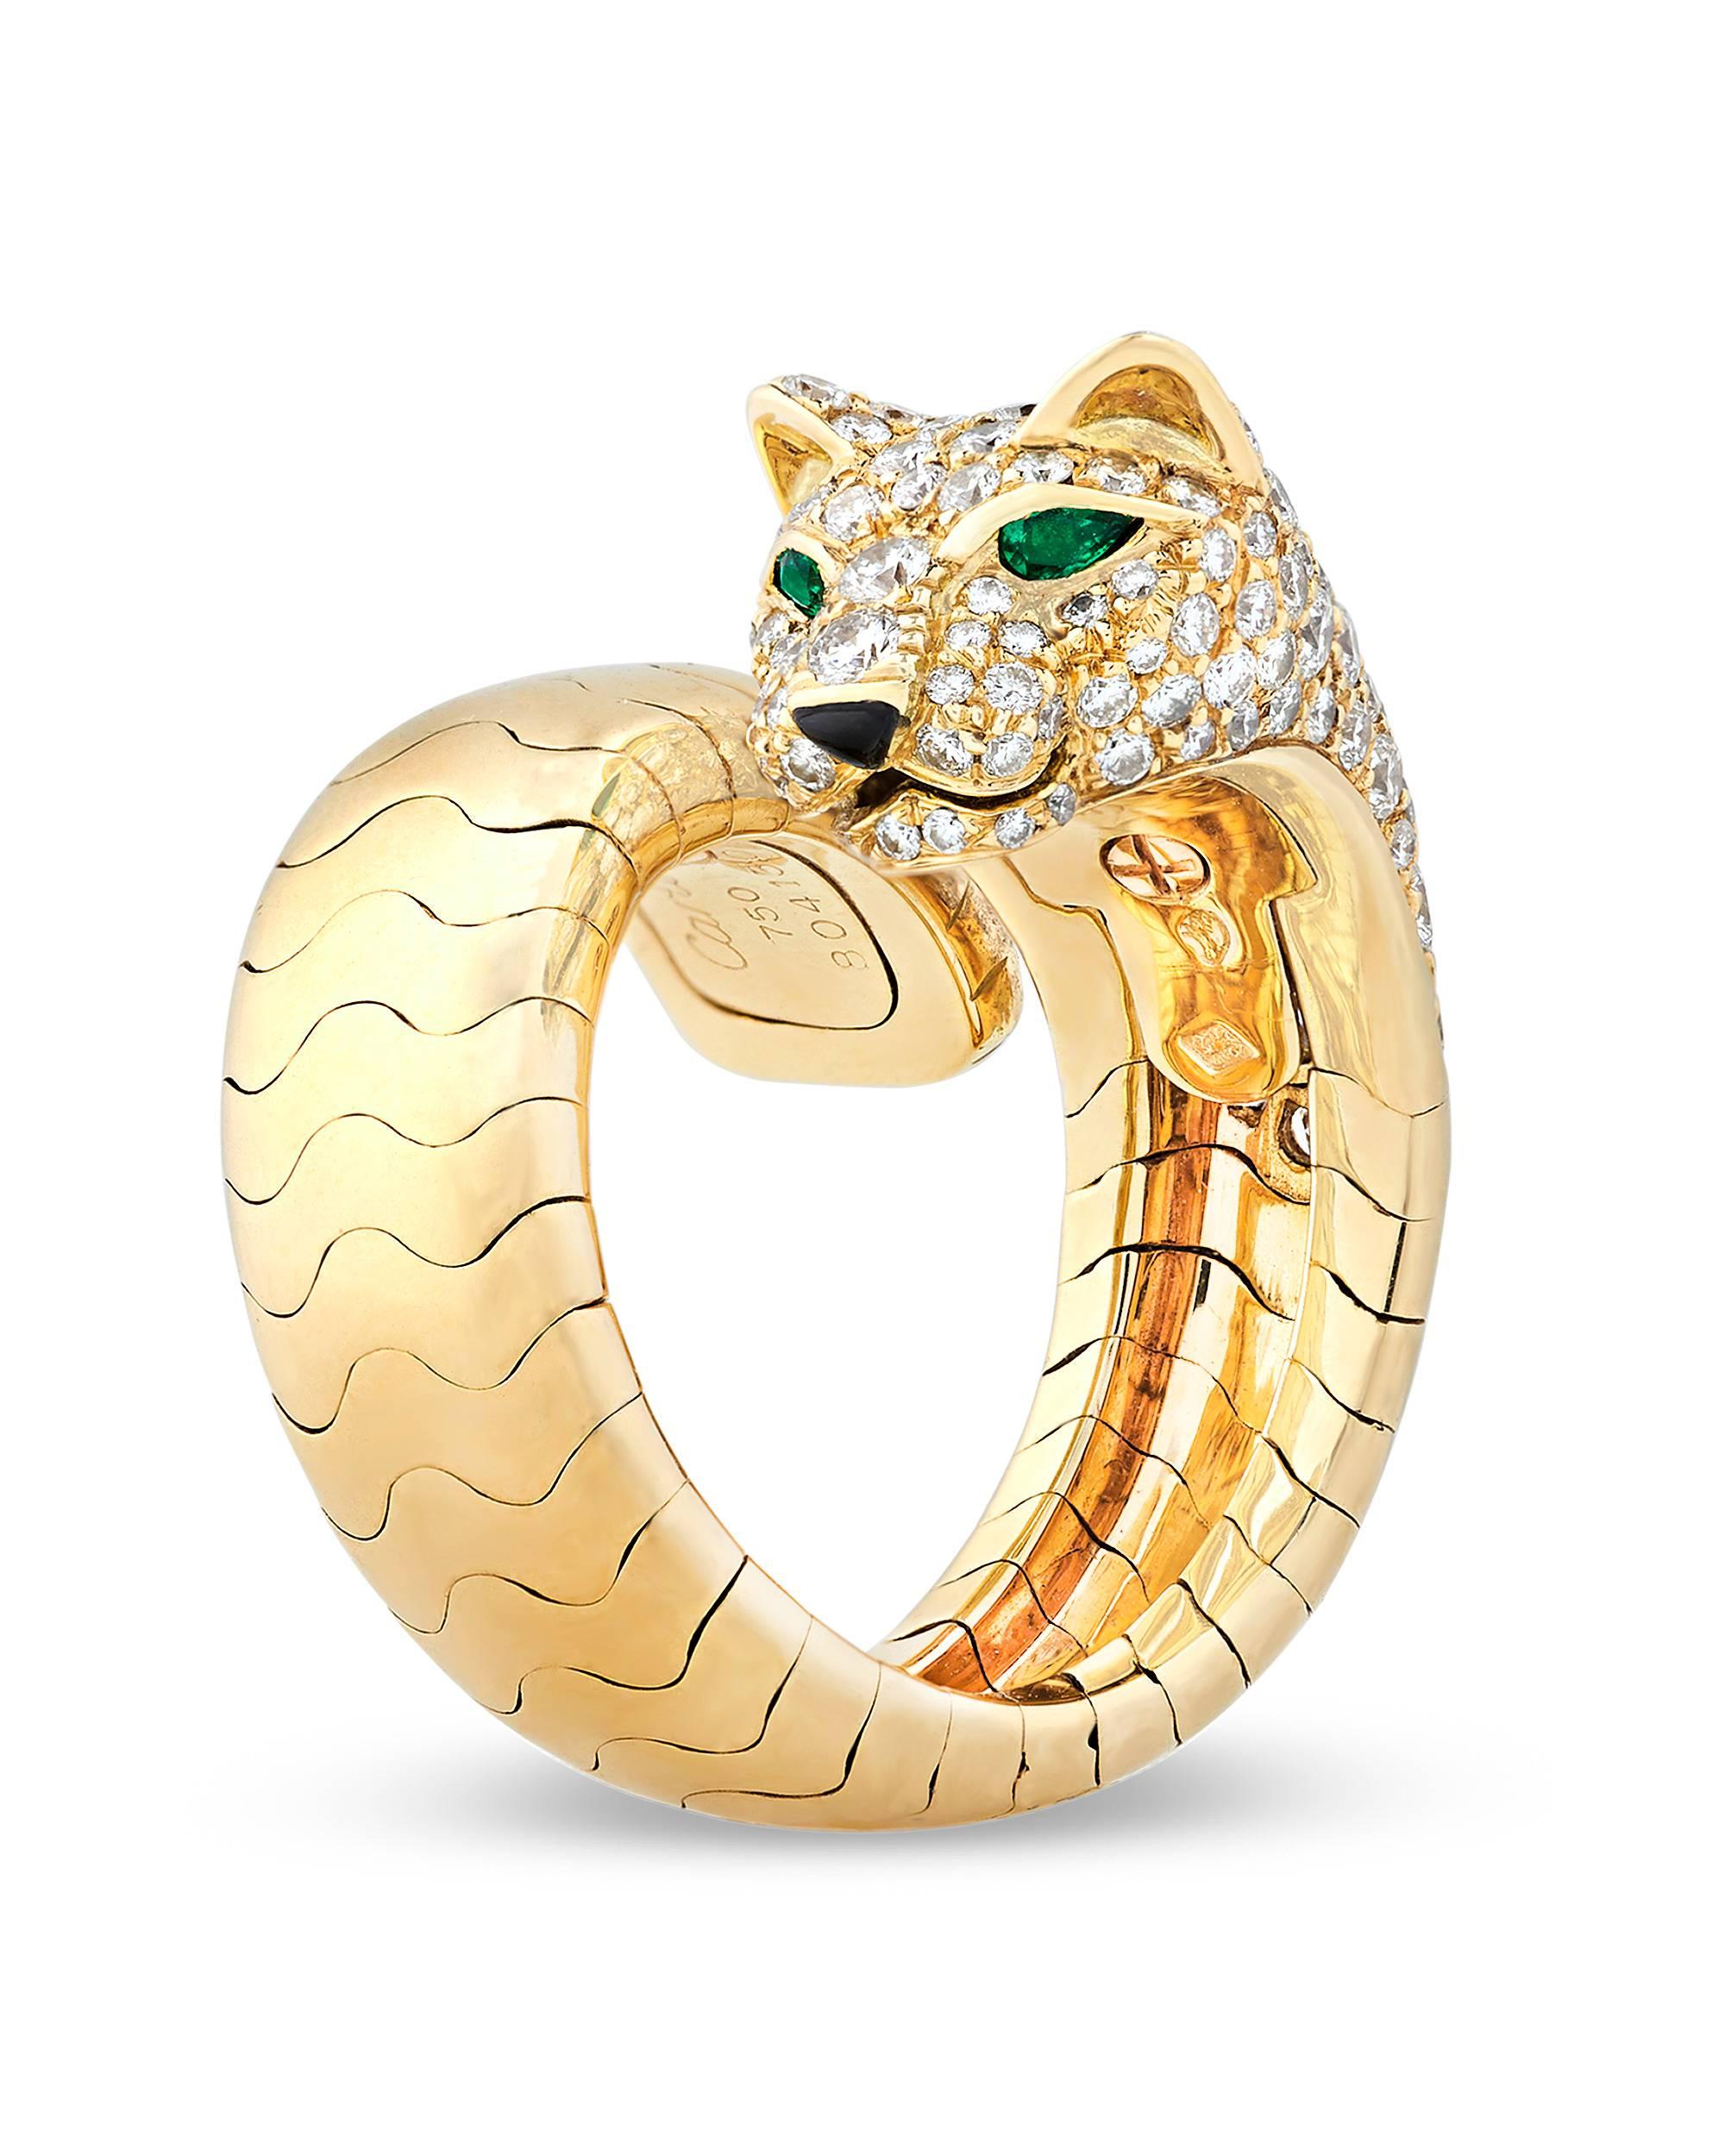 Expressing a perfect blend of fearlessness and femininity, this exquisite diamond Panther ring from the important 